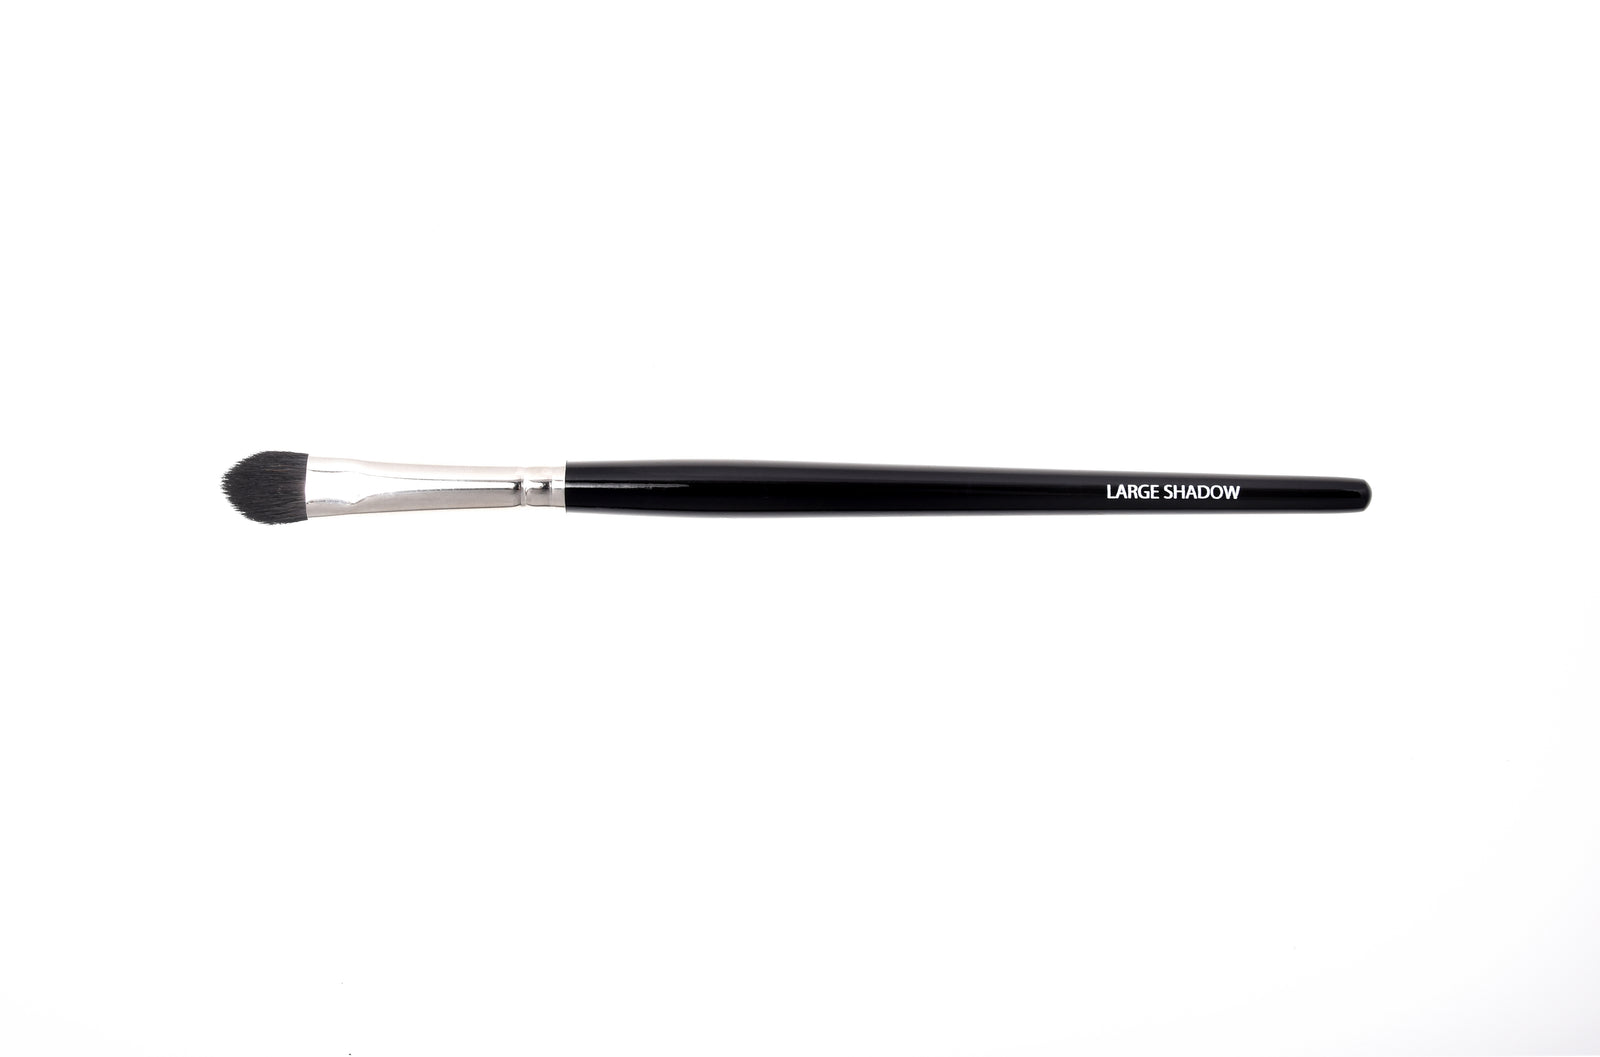 Alcone Company Professional Makeup Brushes, Large Shadow